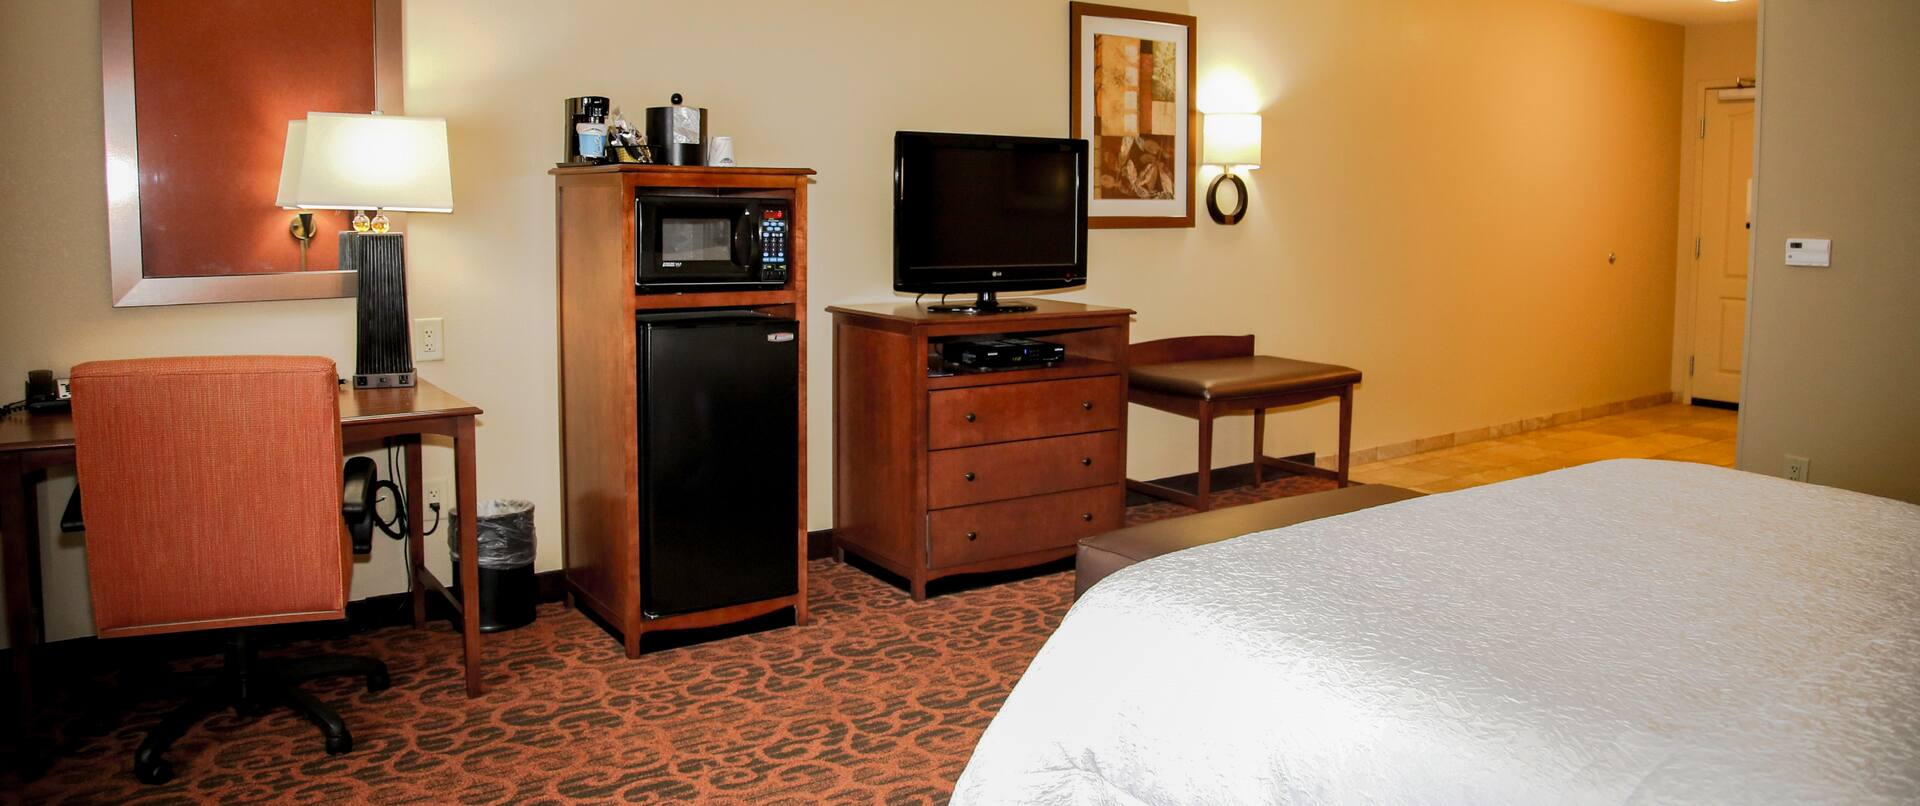 King Bed, Work Desk, Hospitality Center, TV, Wall Art, and Entry in Guest Room